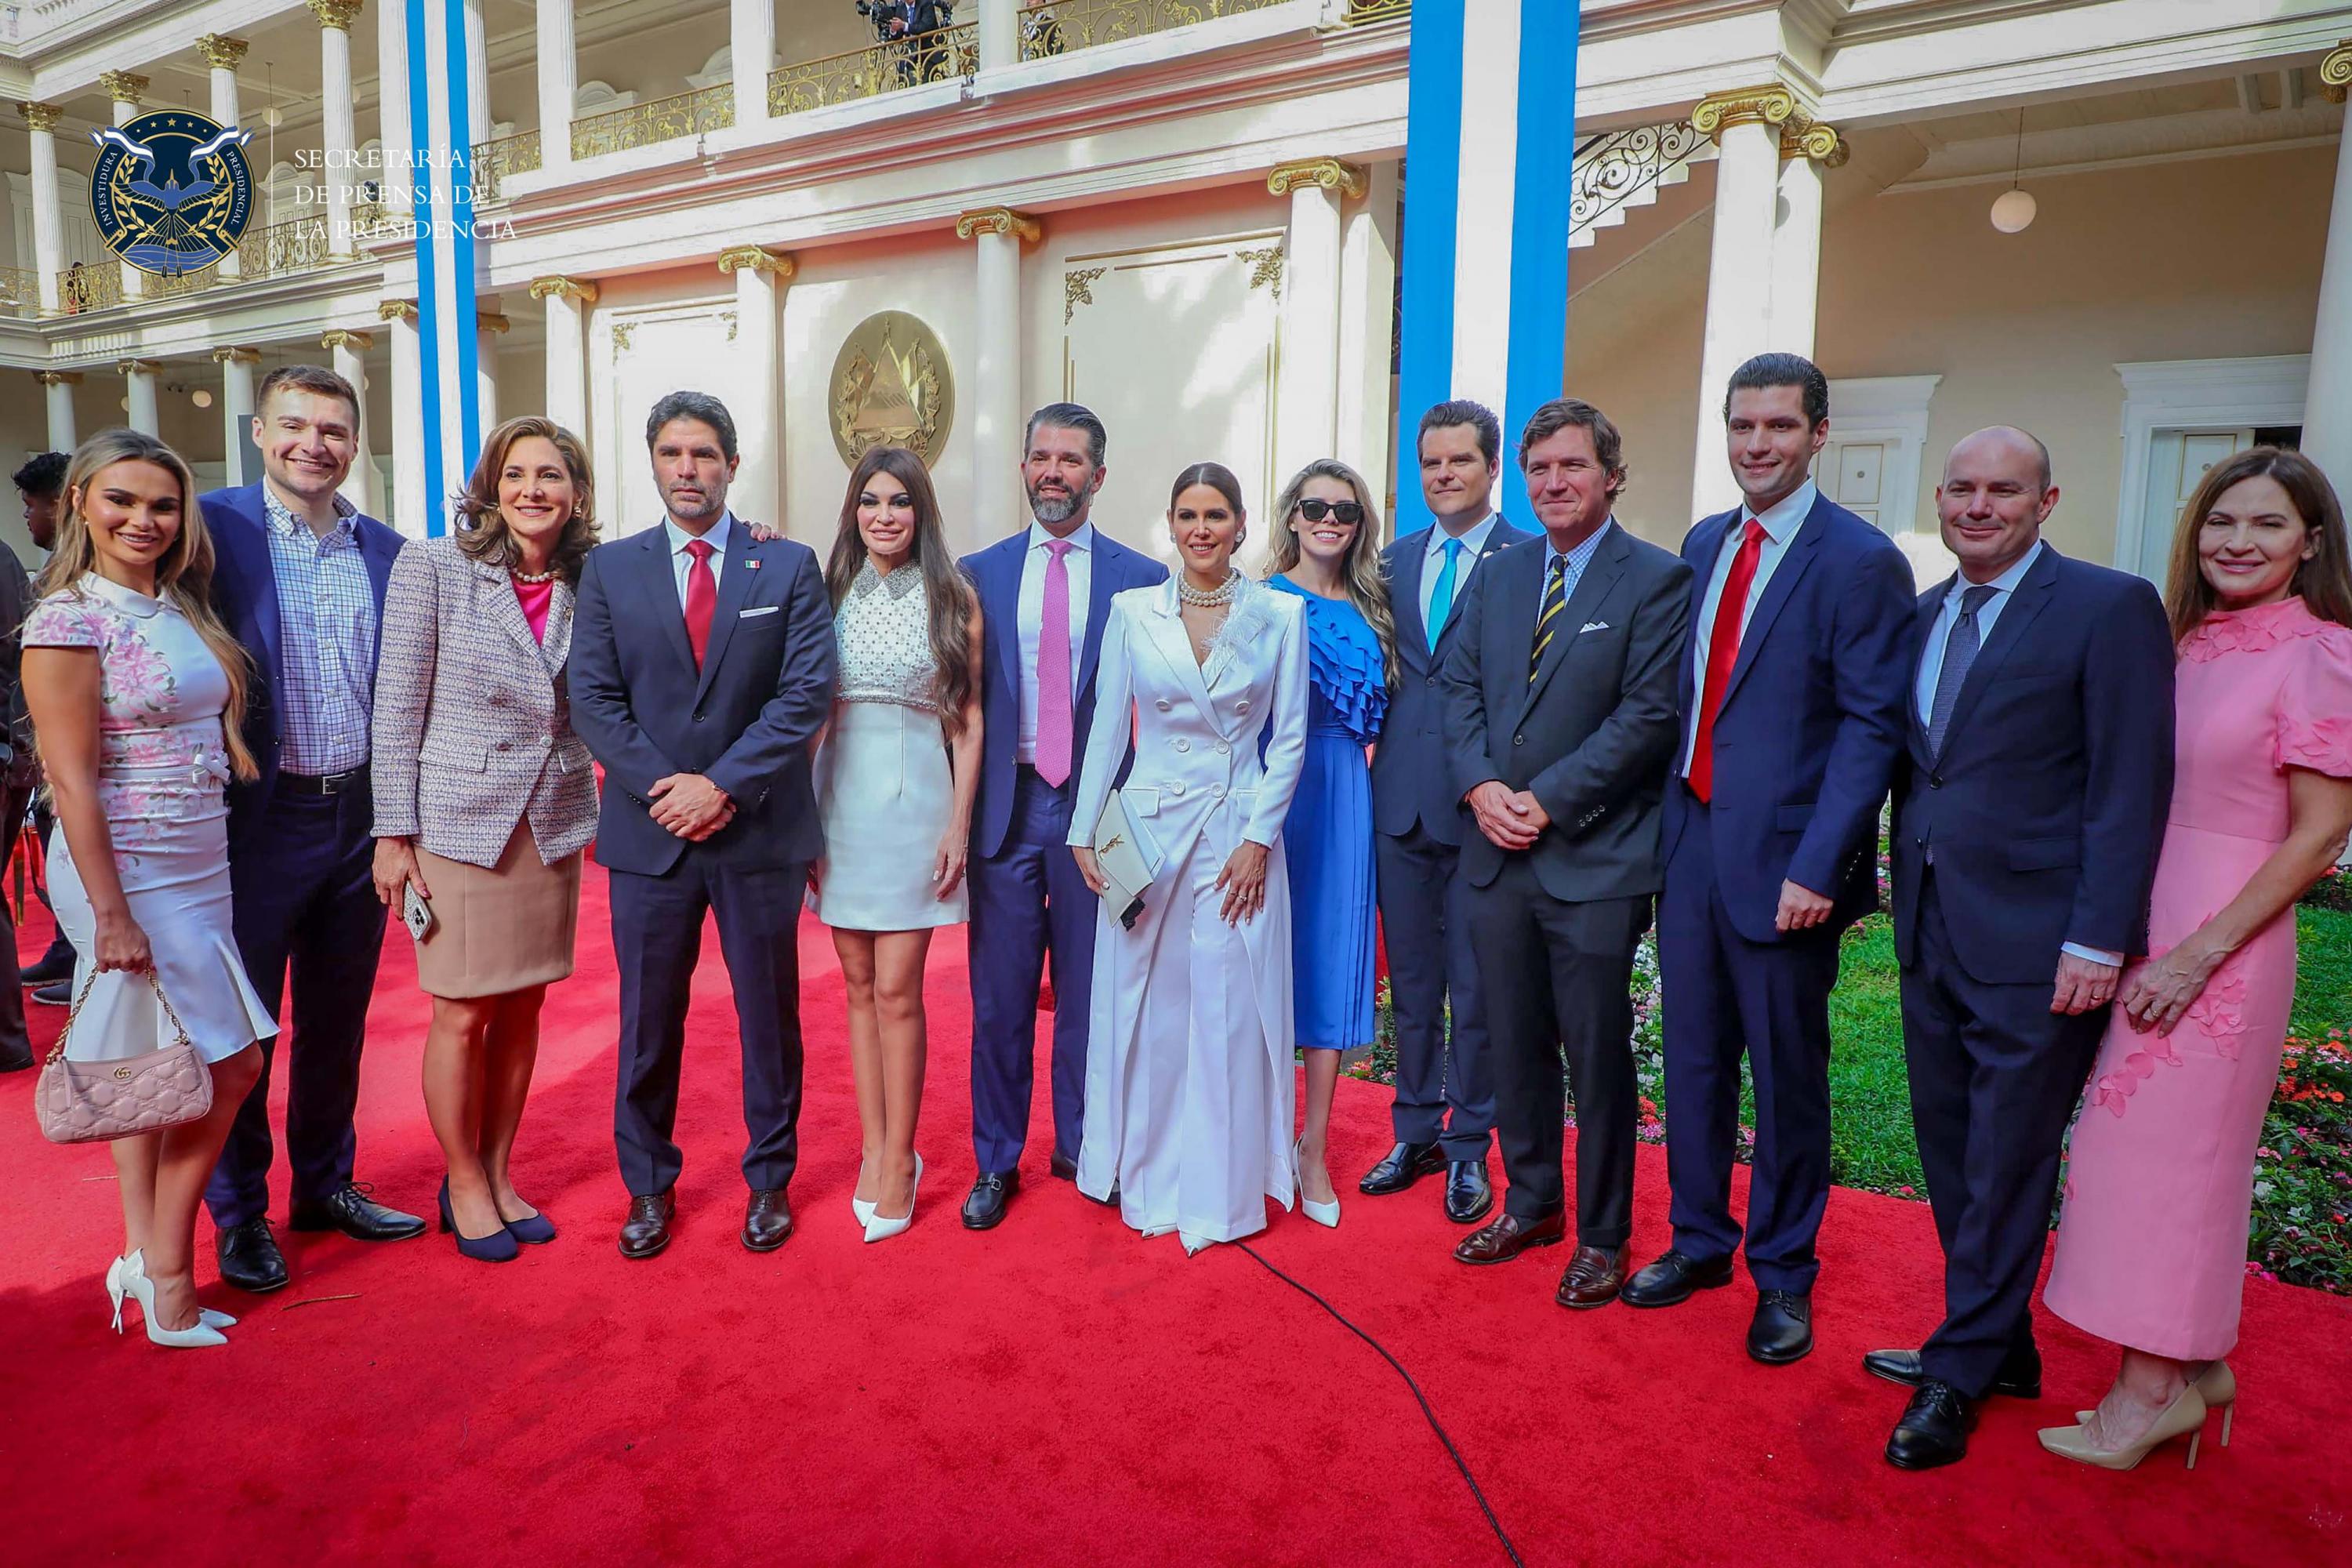 Donald Trump Jr. (middle-left, pink tie) in San Salvador with a group of Trump-aligned U.S. legislators and political influencers for Nayib Bukele